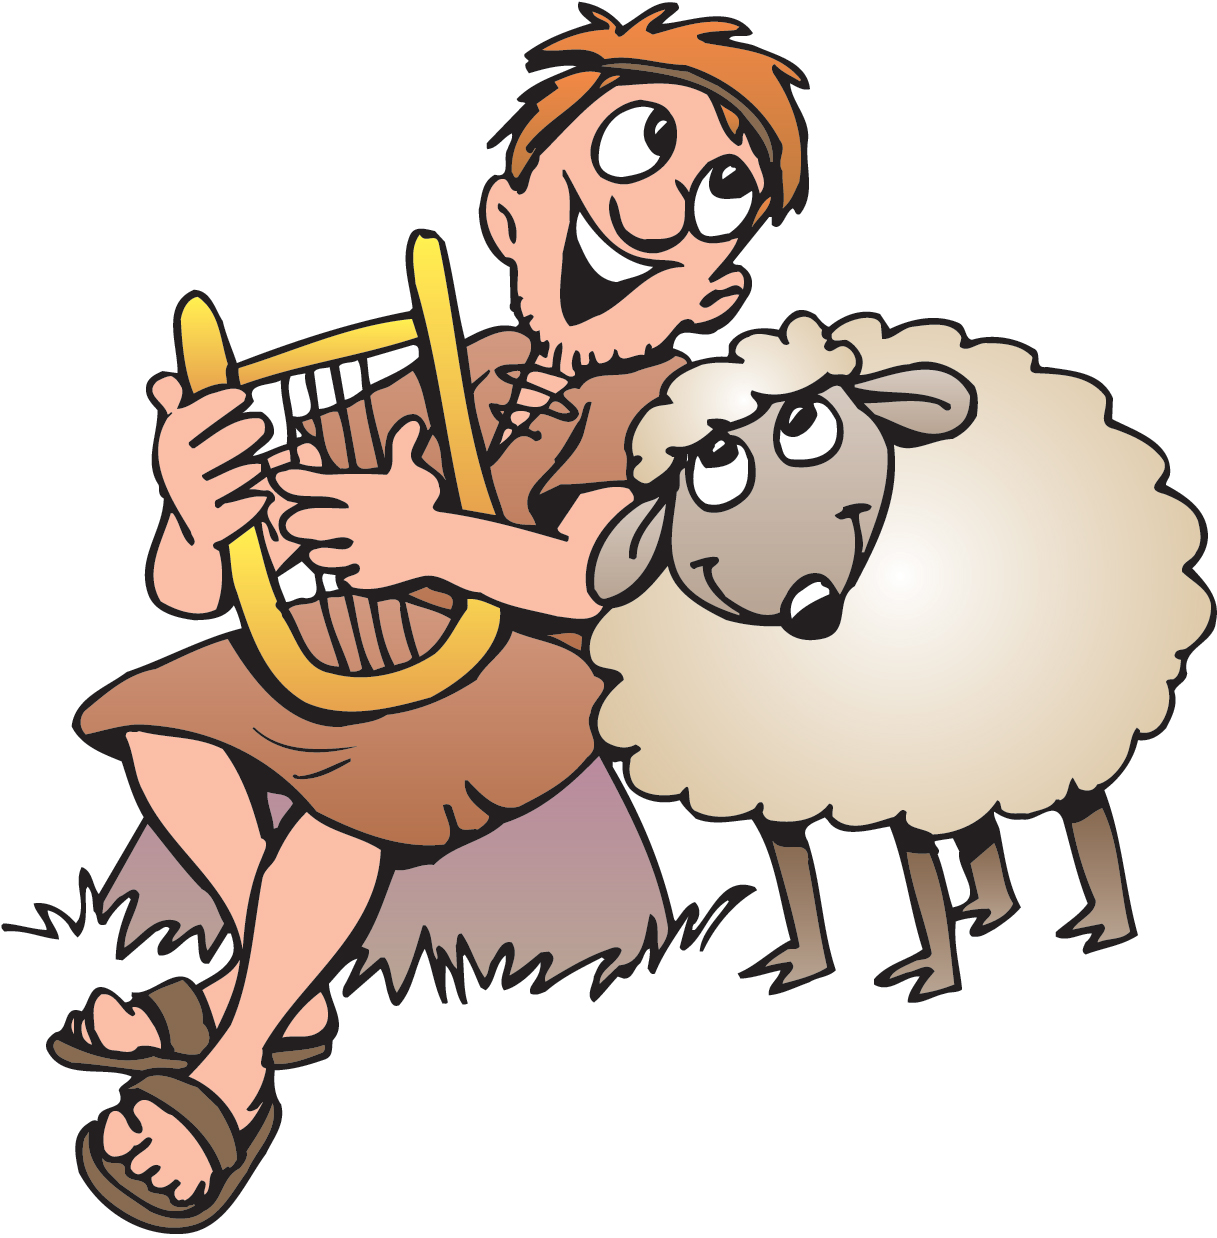 the lord is my shepherd clipart - photo #32